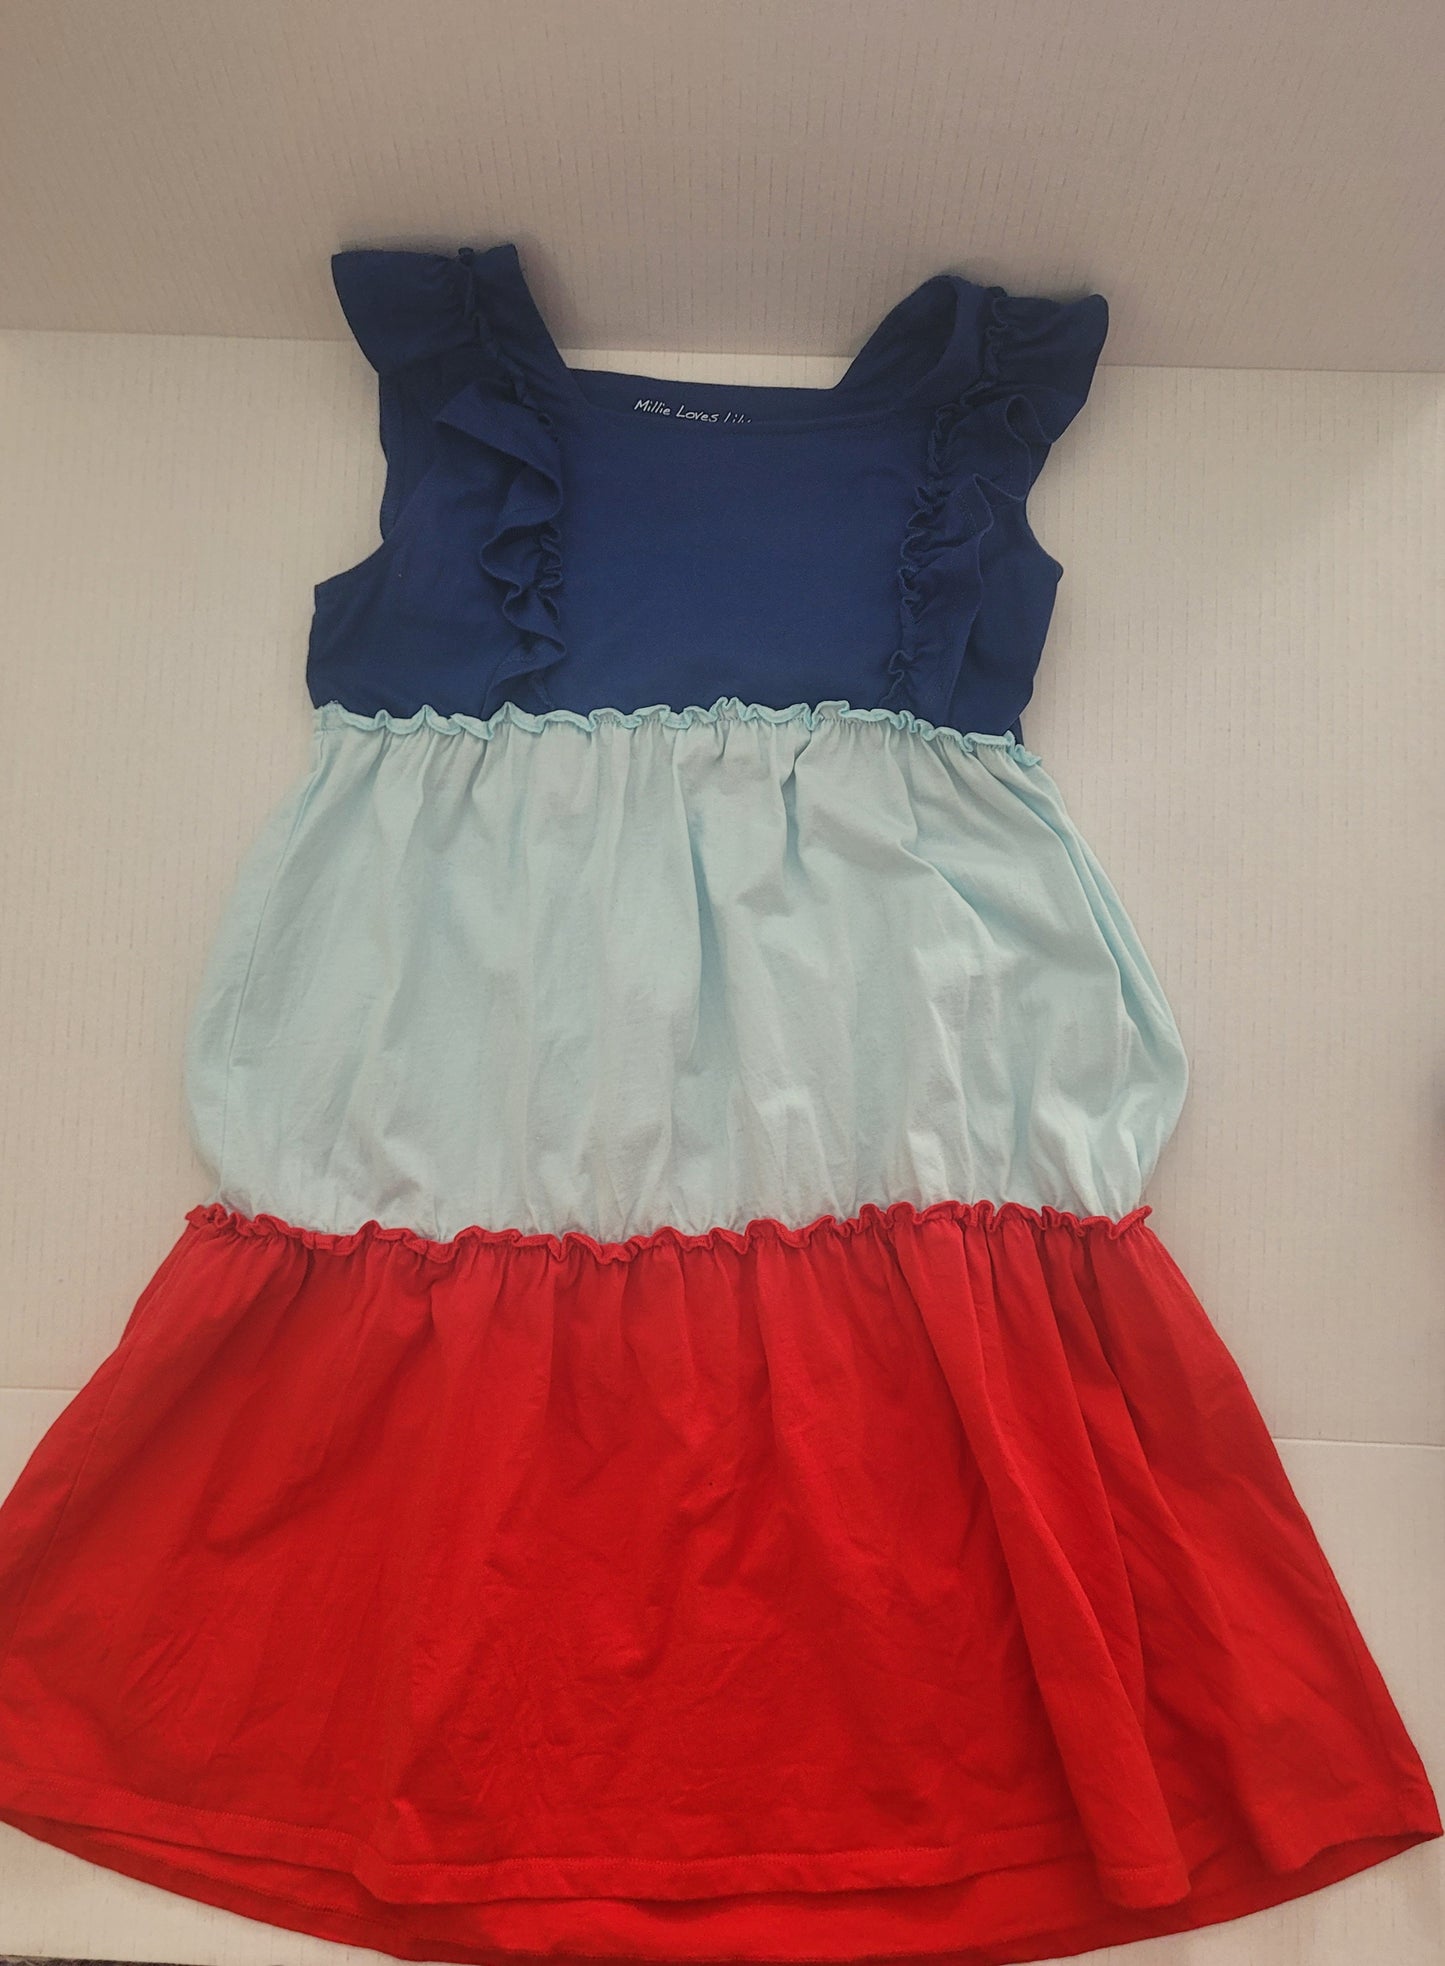 Millie Loves Lily Girls Tiered Twirl Dress Size 12